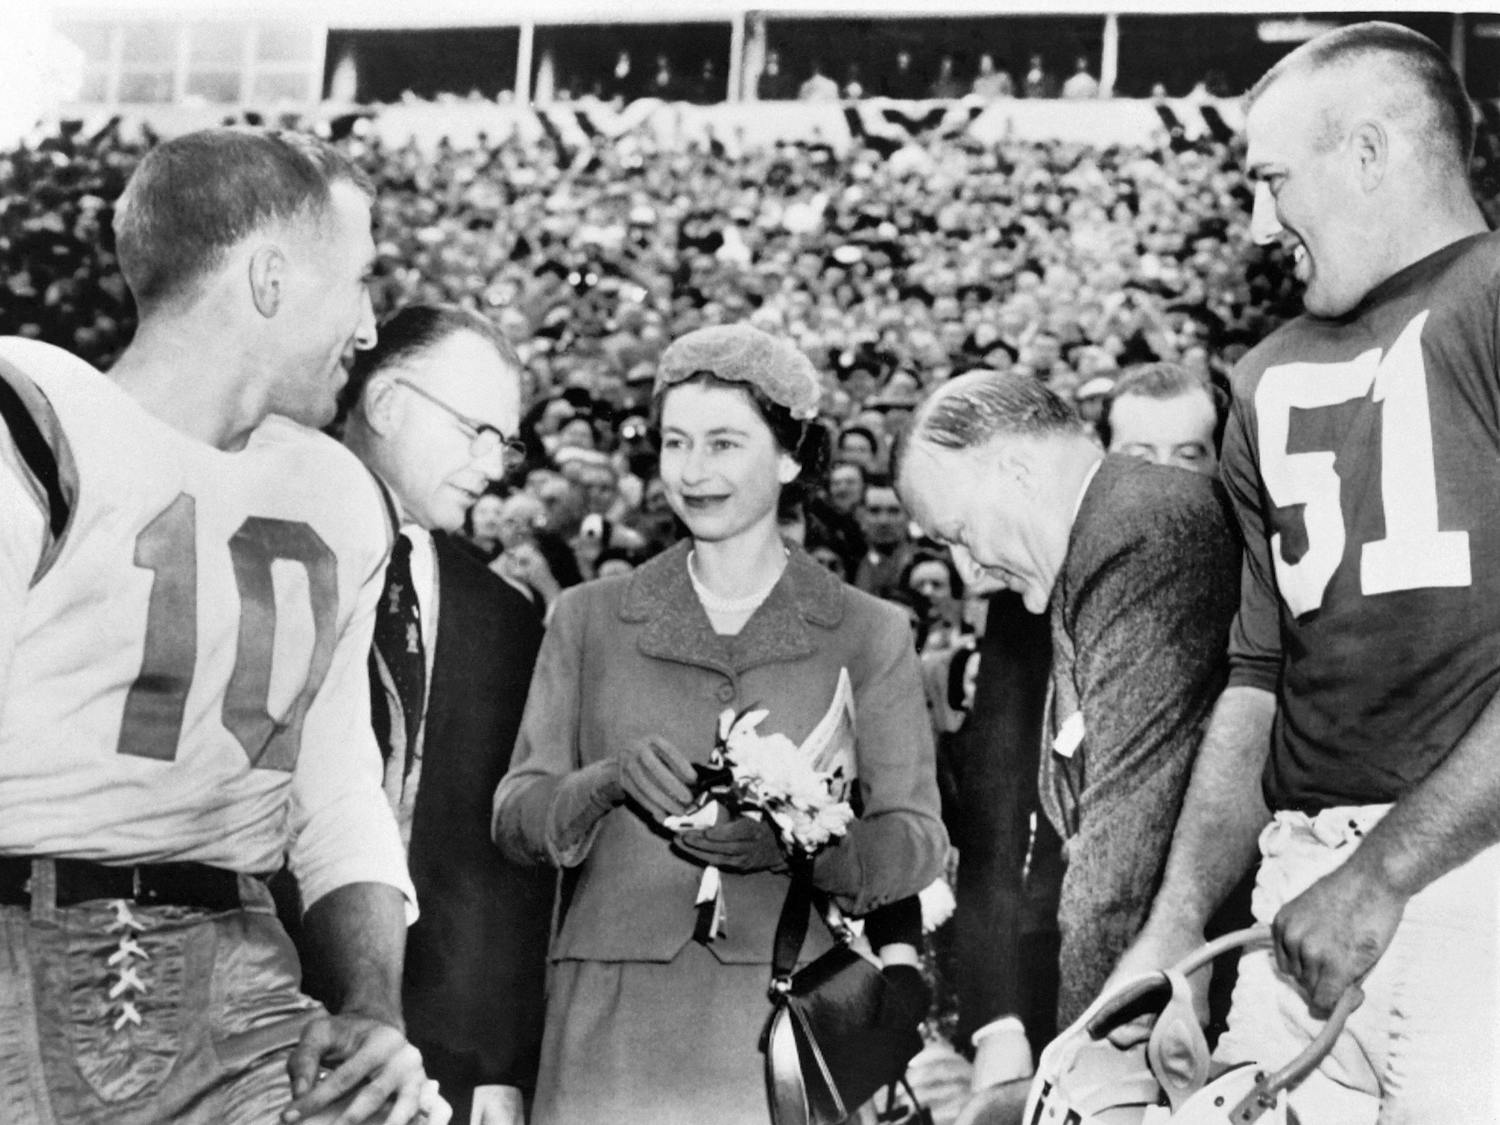 Queen Elizabeth II meets U.S. football players before a Maryland-North Carolina game in College Park, Maryland, during a visit to the United States on Oct. 21, 1957.
Photo Courtesy of International News Photos/AFP/Getty Images/TNS.